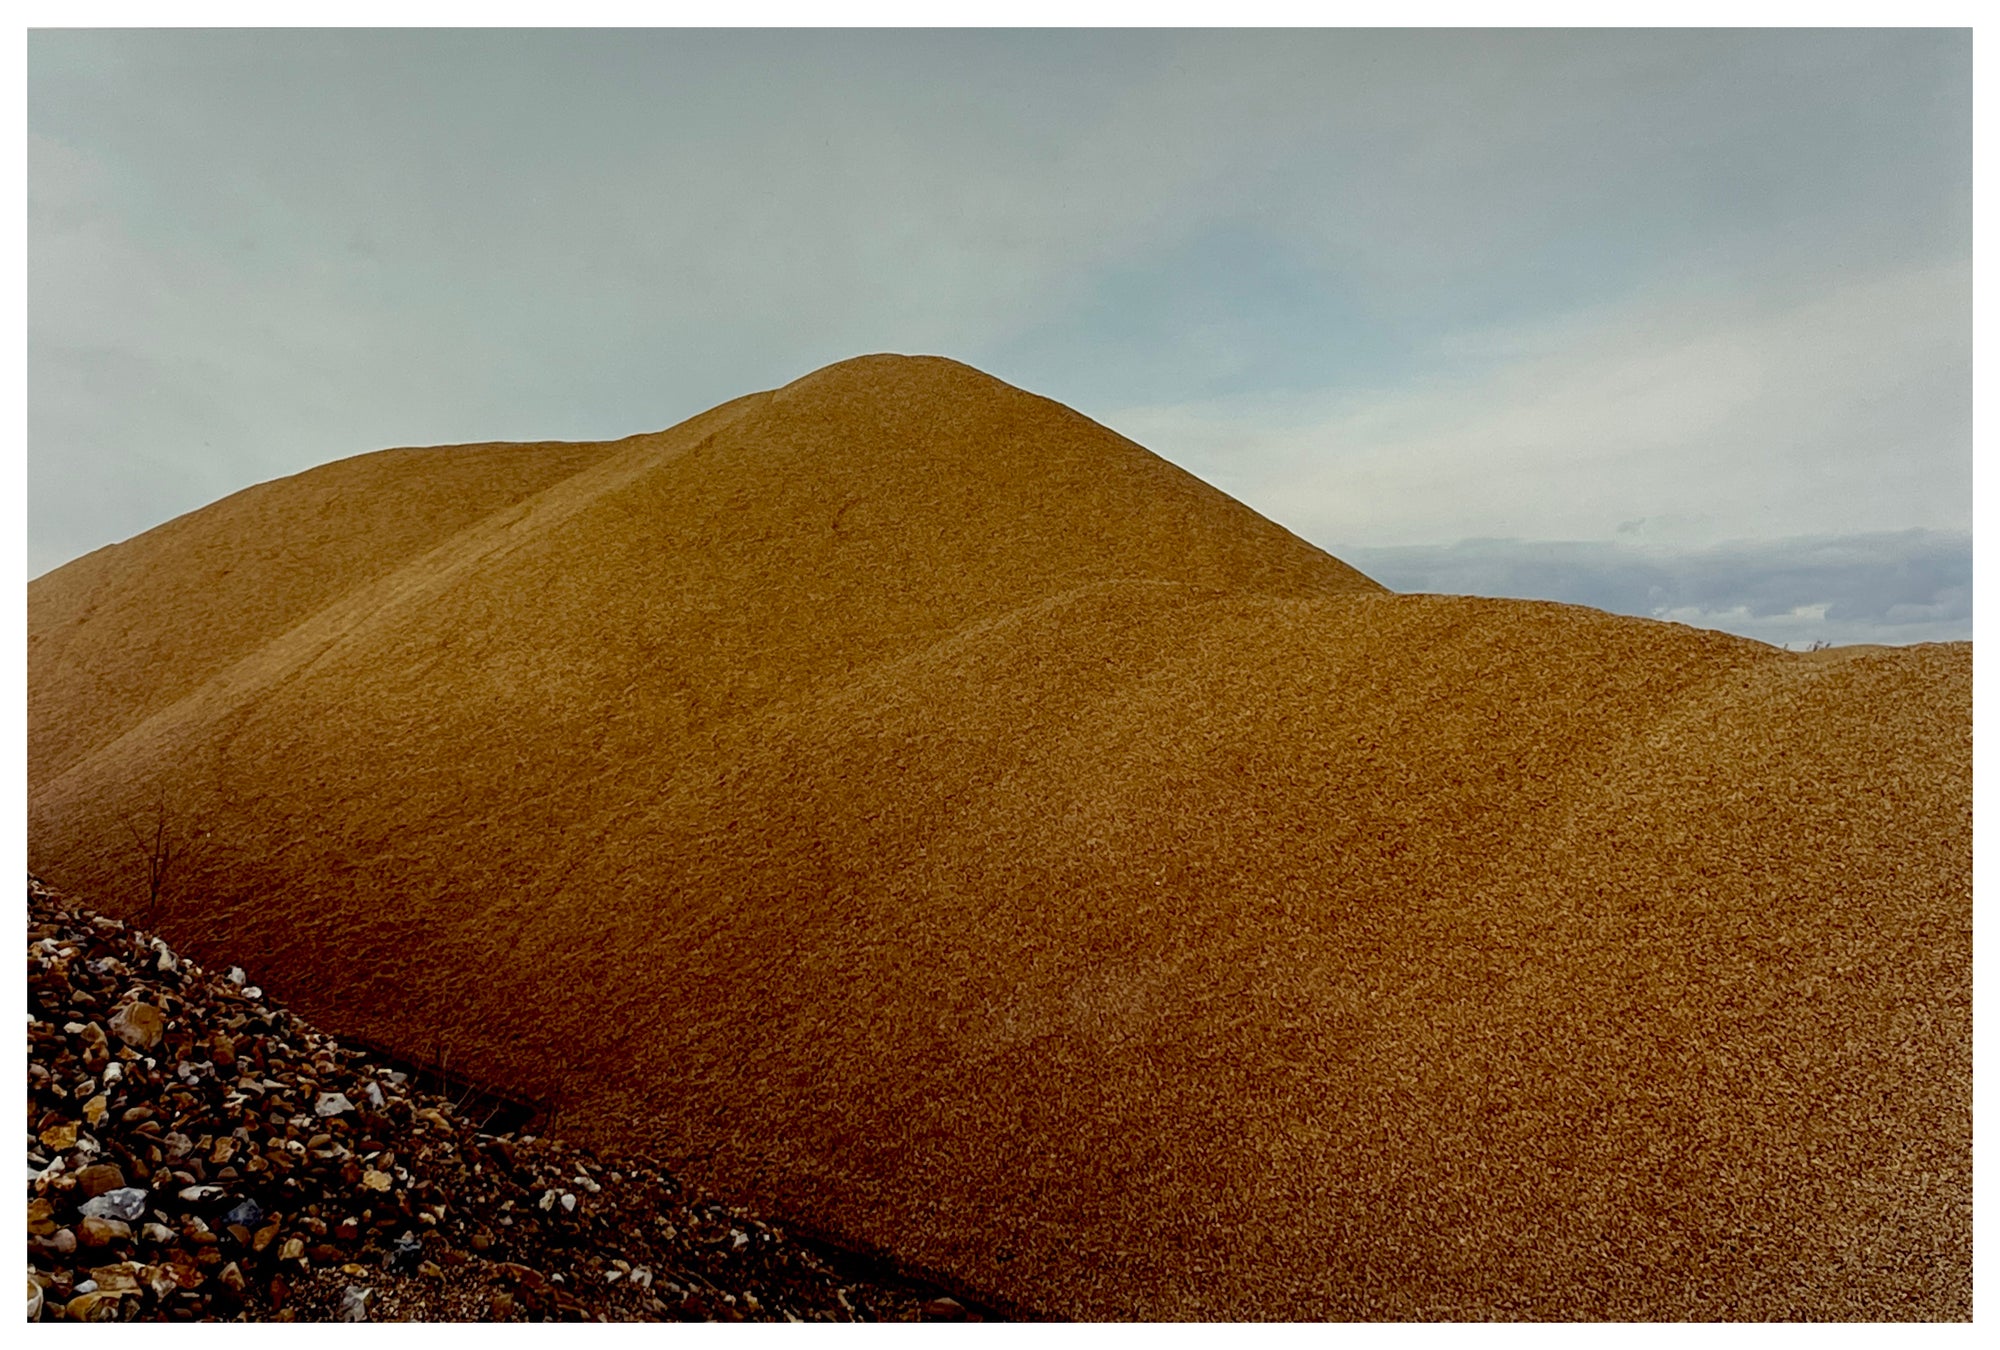 Photograph by Richard Heeps.  A golden pile of aggregate is piled up set against a cloudy sky.